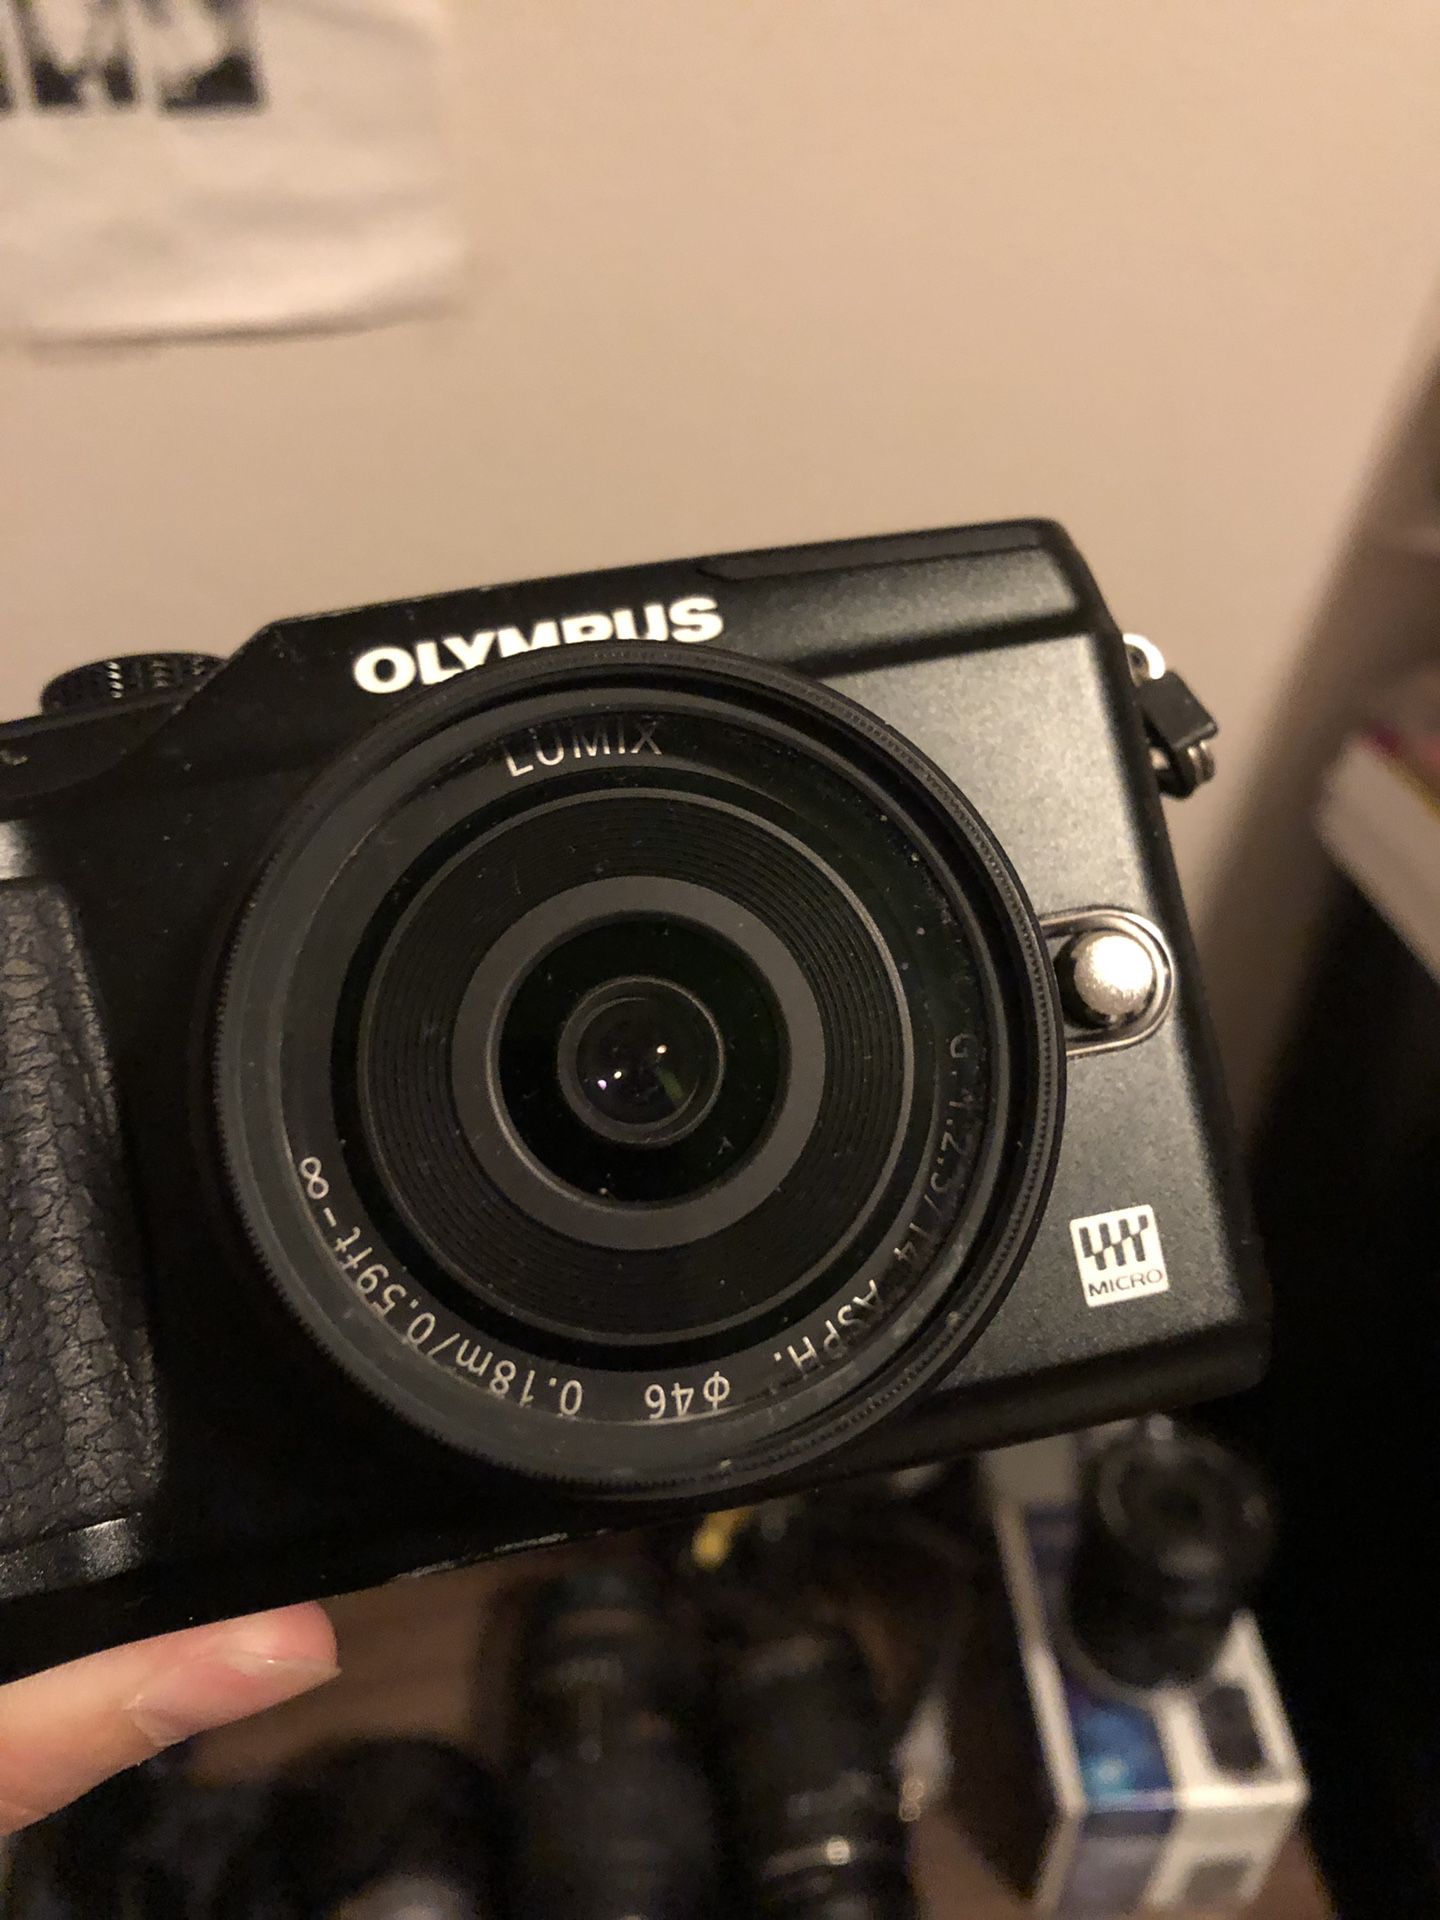 Olympus EPL-2 mirrorless camera and extras